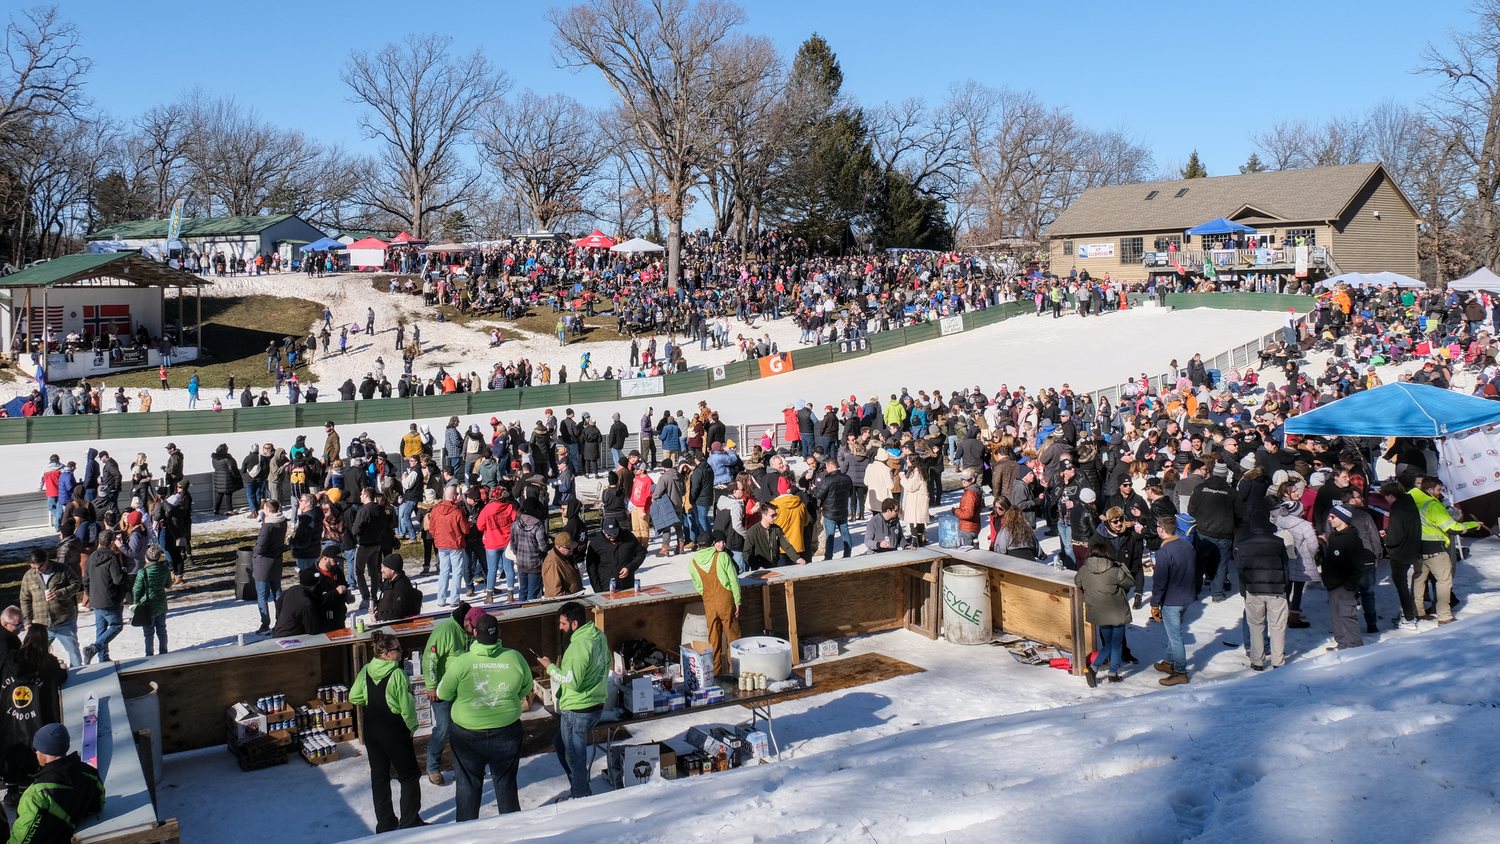 Crowd enjoying a break before K70 at the 118th annual Norge Ski Club, winter tournament, 2023.